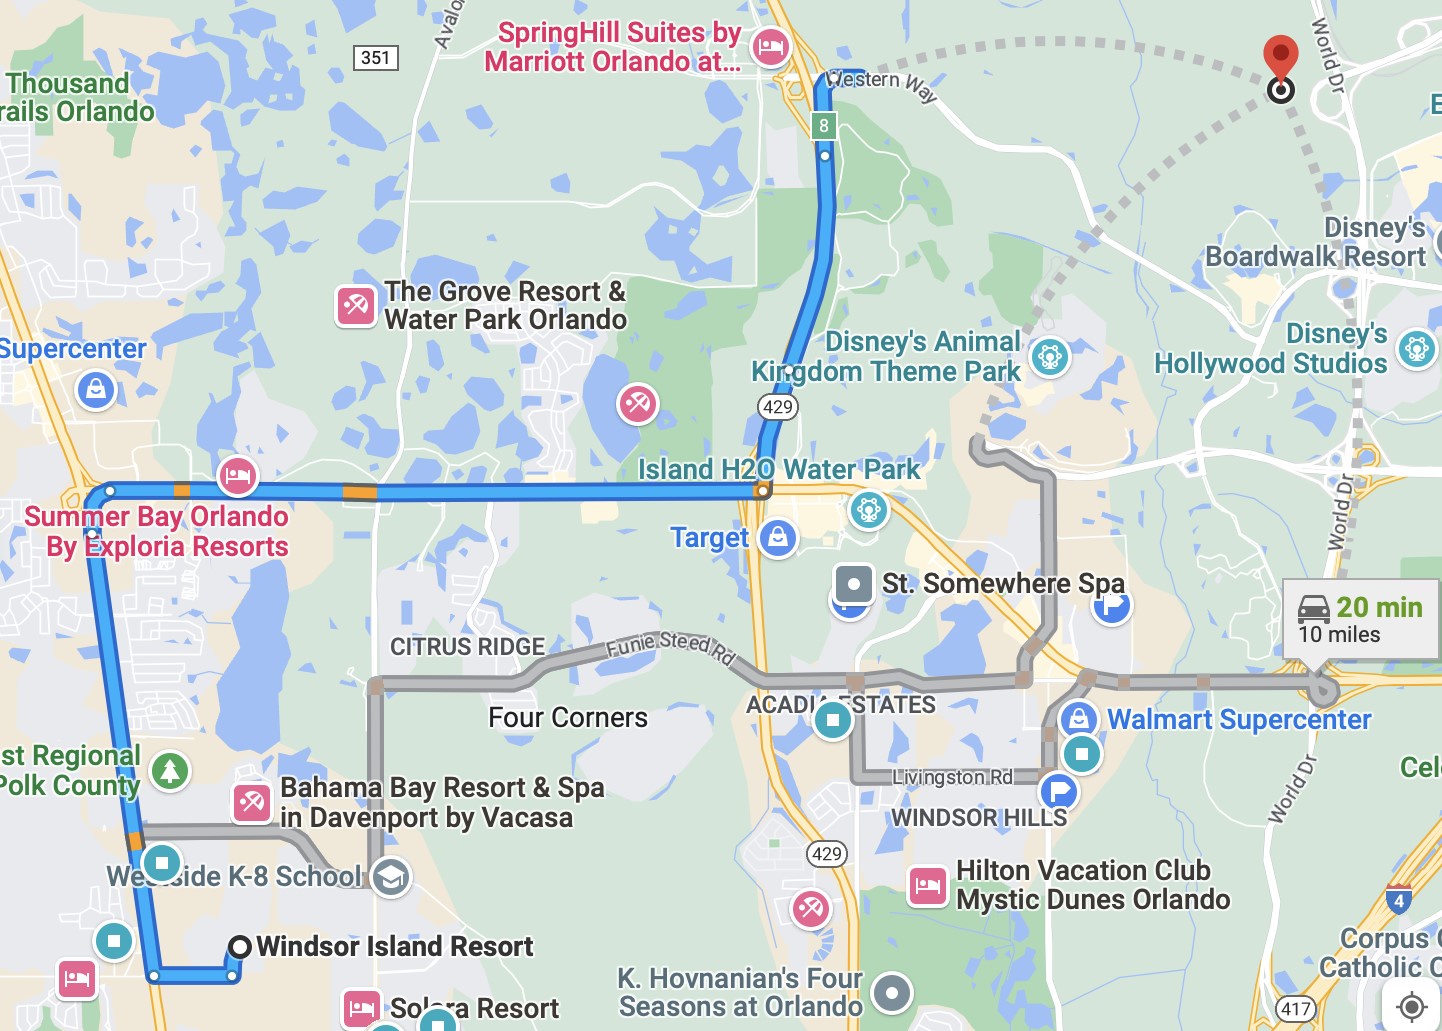 Enjoy being within 9 miles of Disney during your visit!